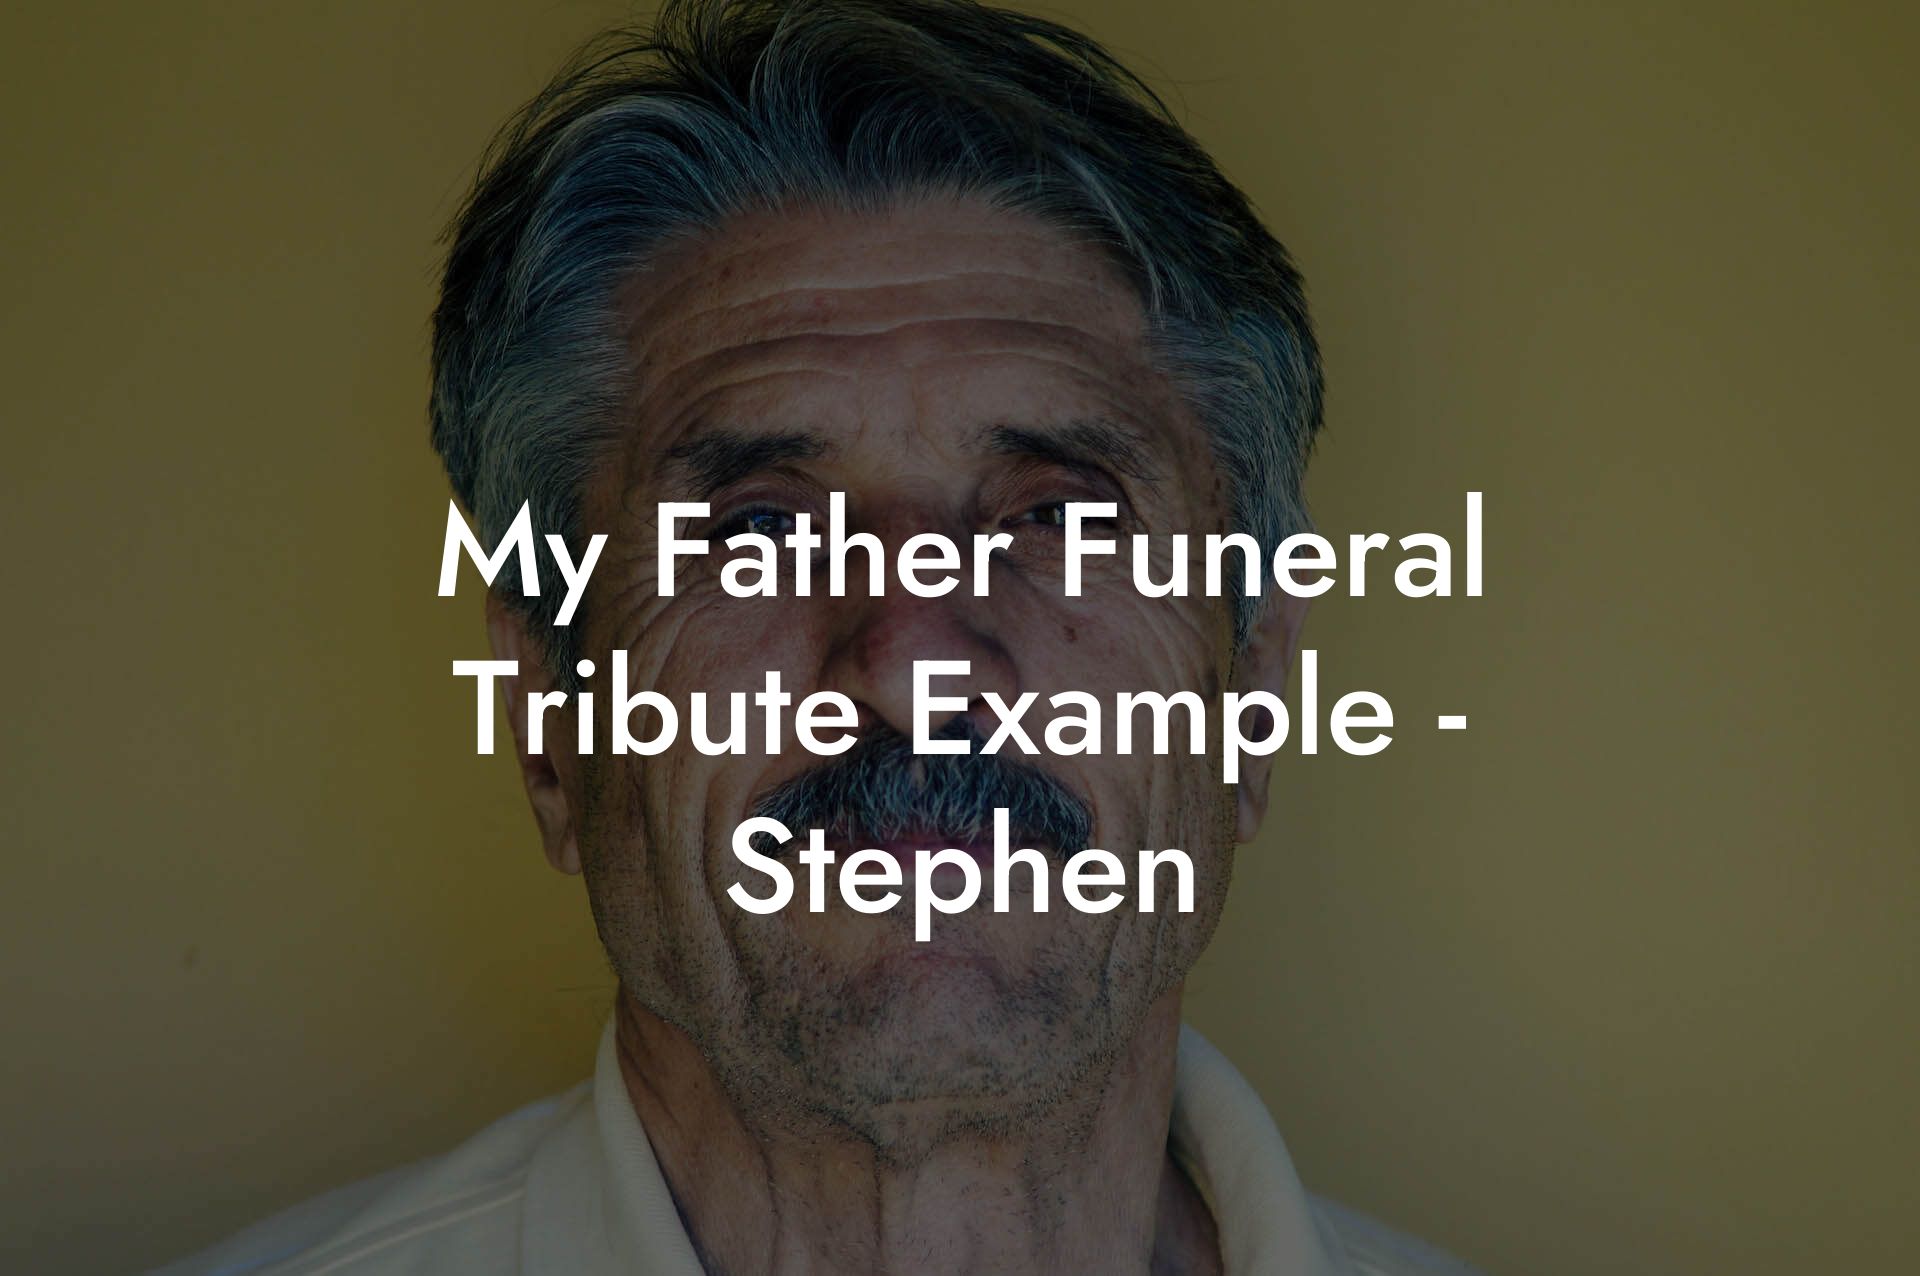 My Father Funeral Tribute Example - Stephen